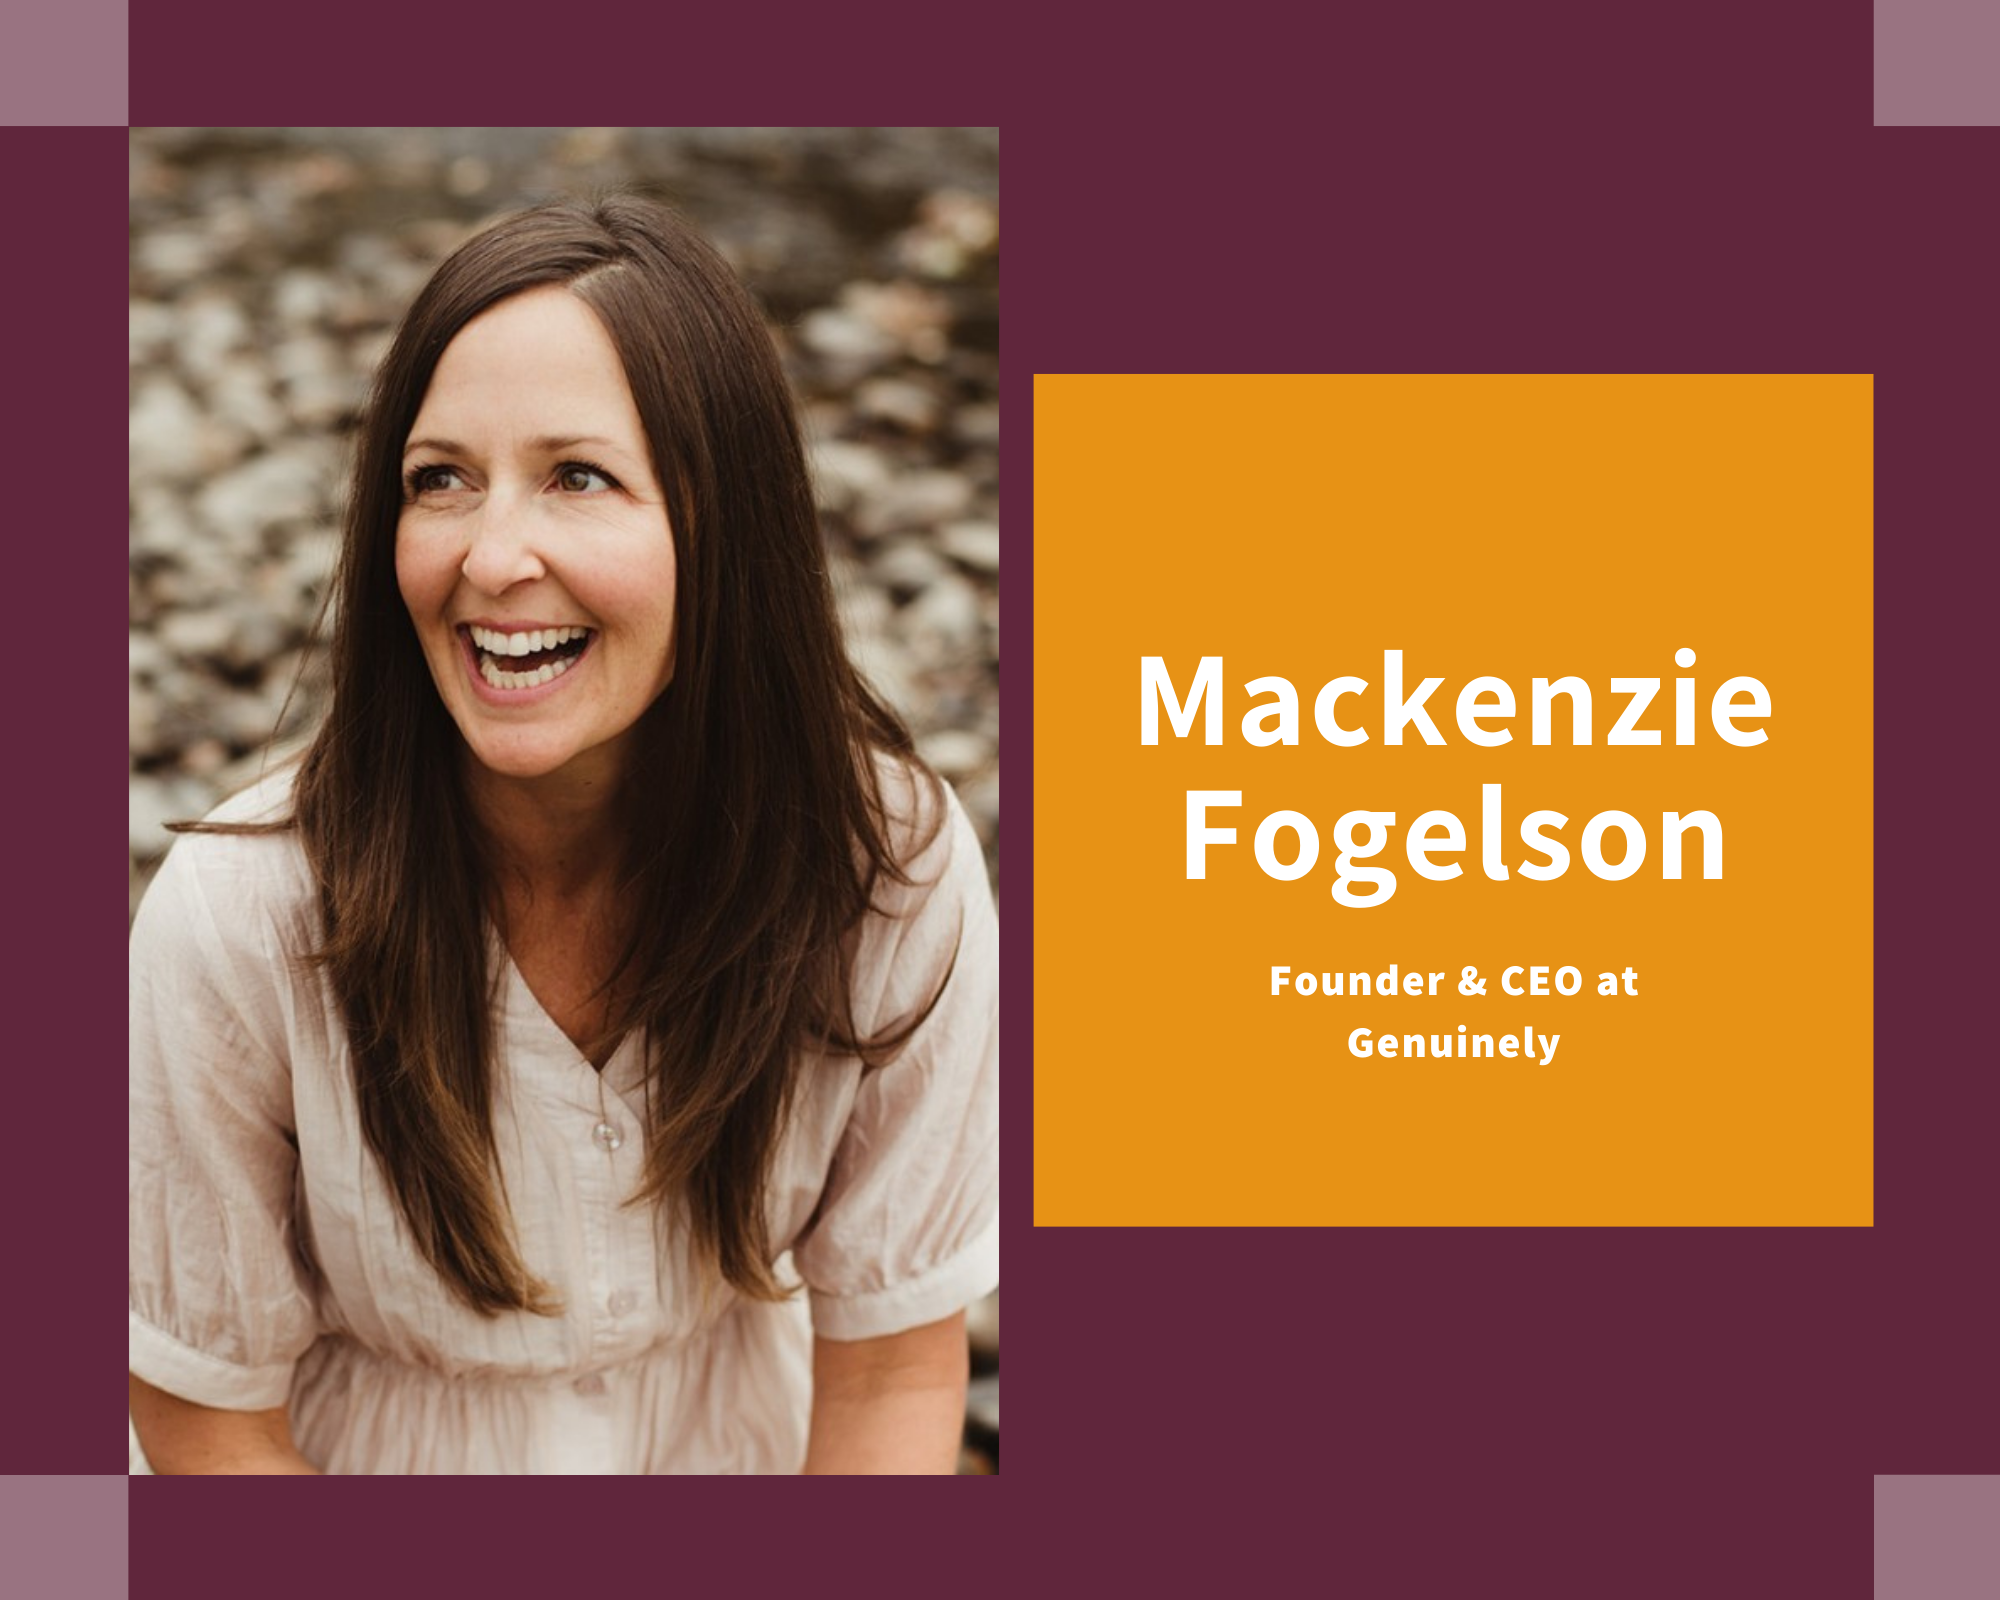 Mackenzie Fogelson weighs in on the skills every conversion rate expert needs.